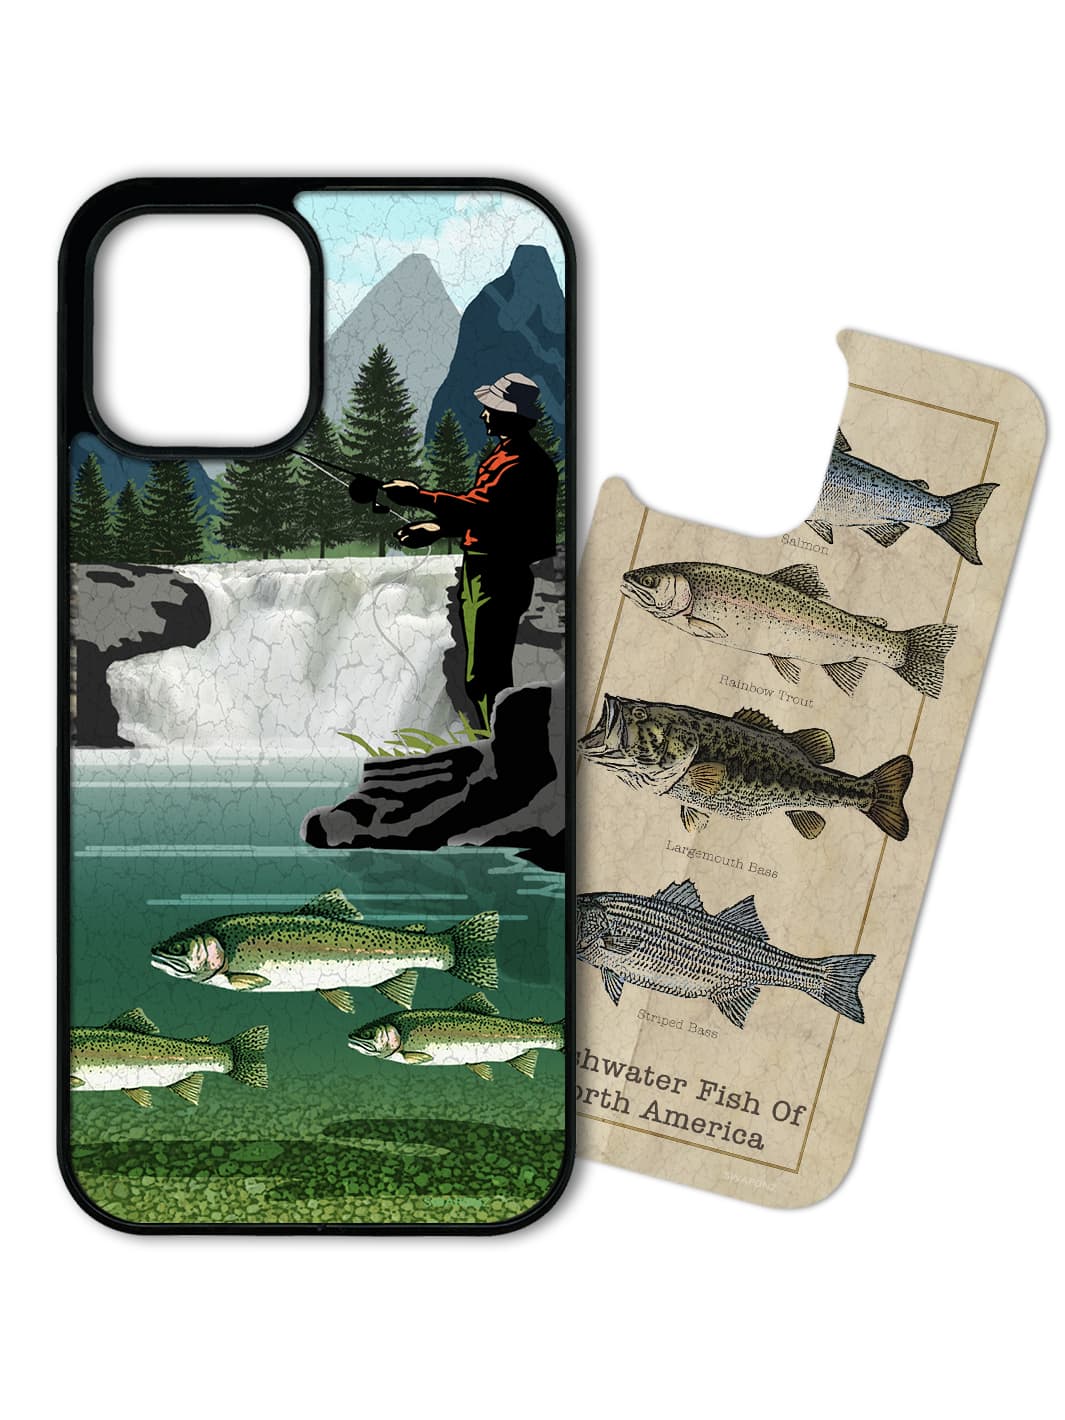 Iphone 13 Cover Fly Fishing, Iphone 13 Fly Fishing Case